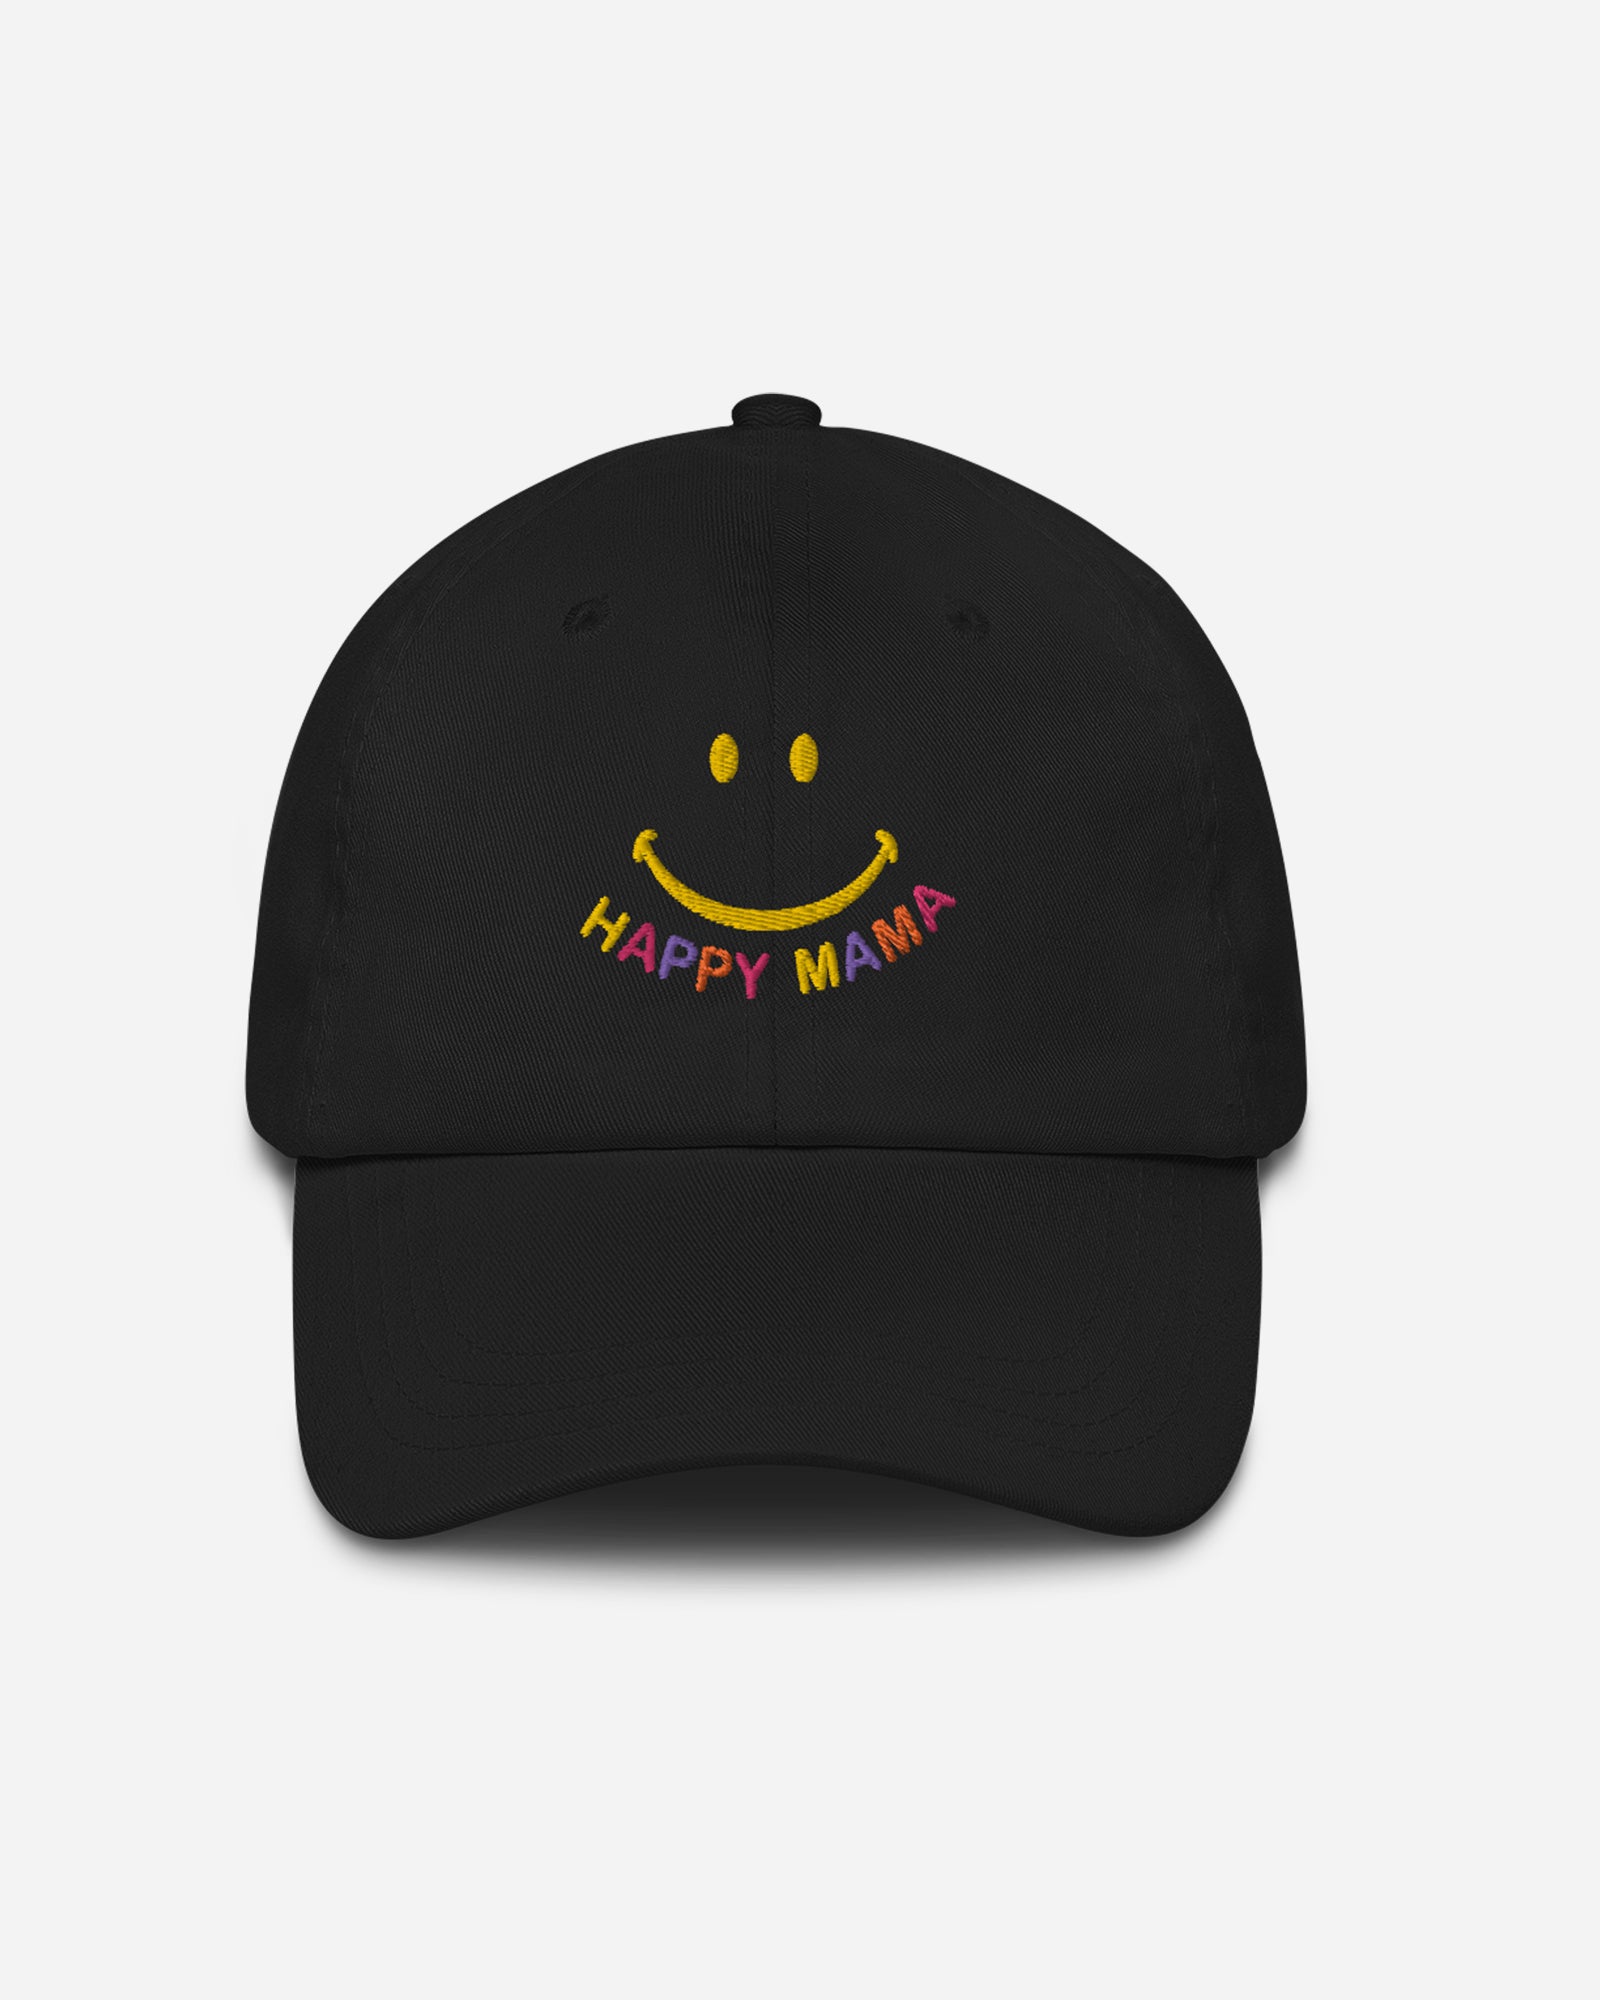 TODAY Happy Mama Embroidered Hat